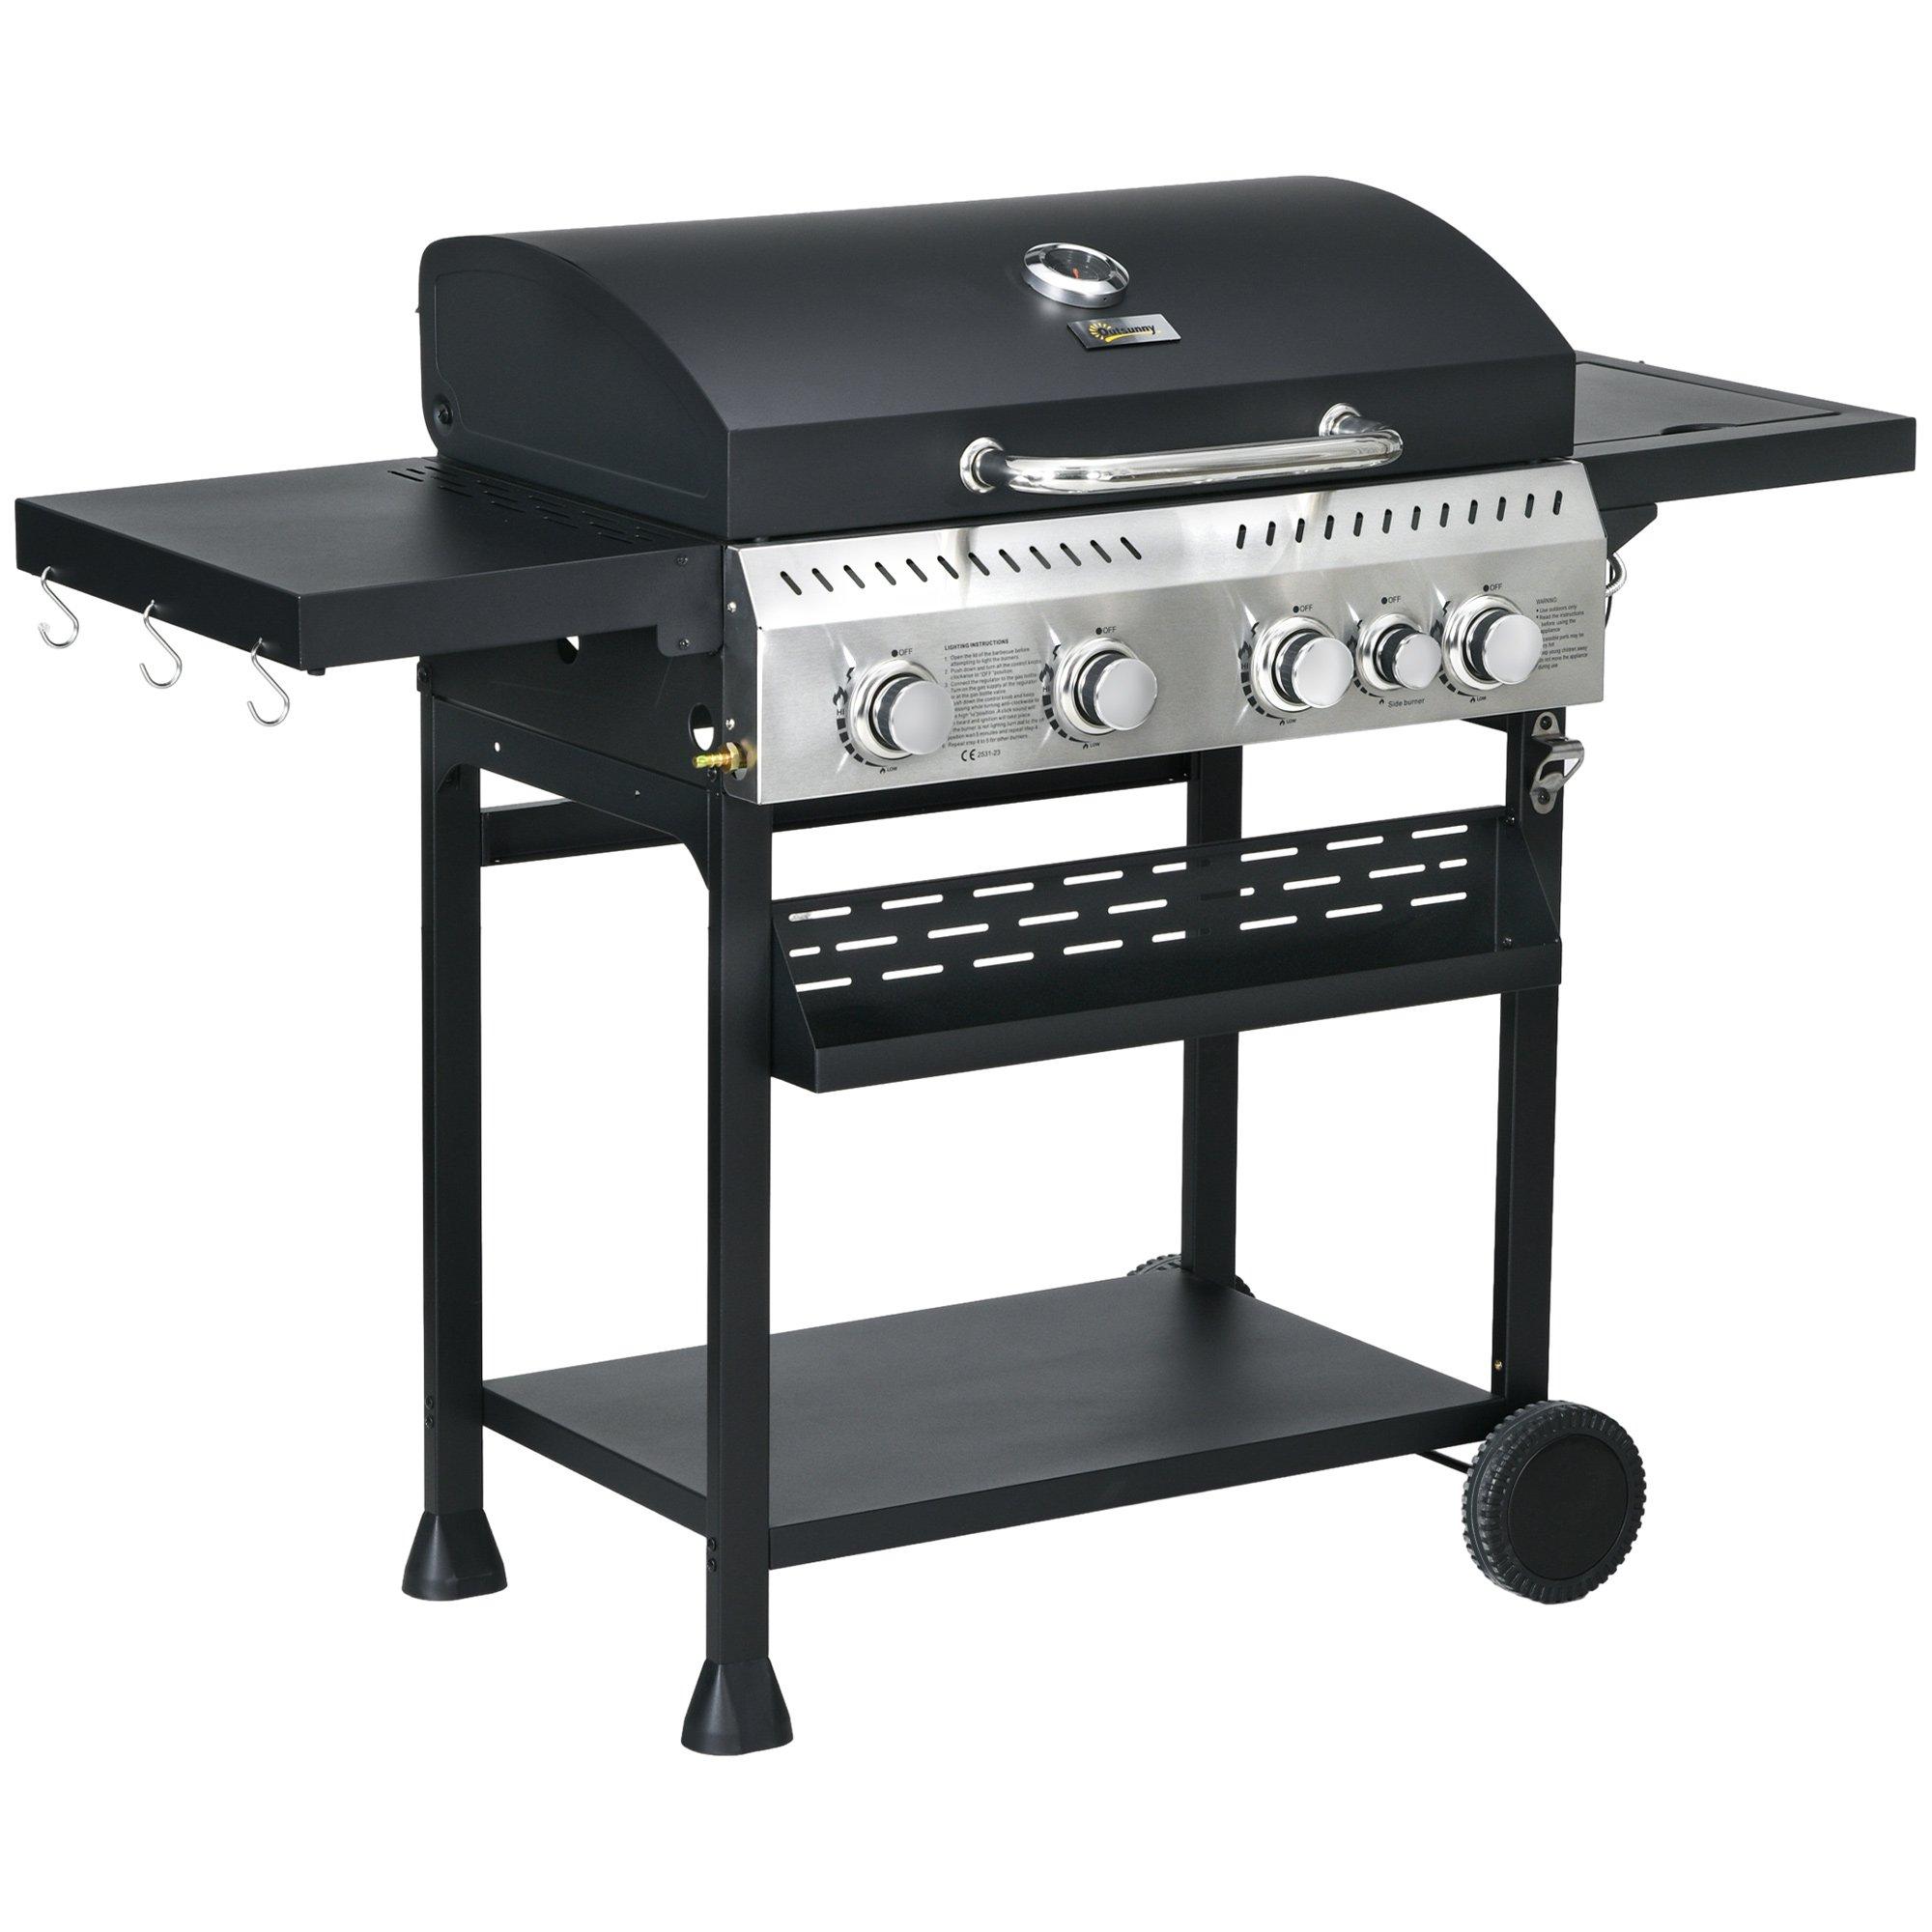 Burner Propane Gas Barbecue Grill with Thermometer, Bottle Opener